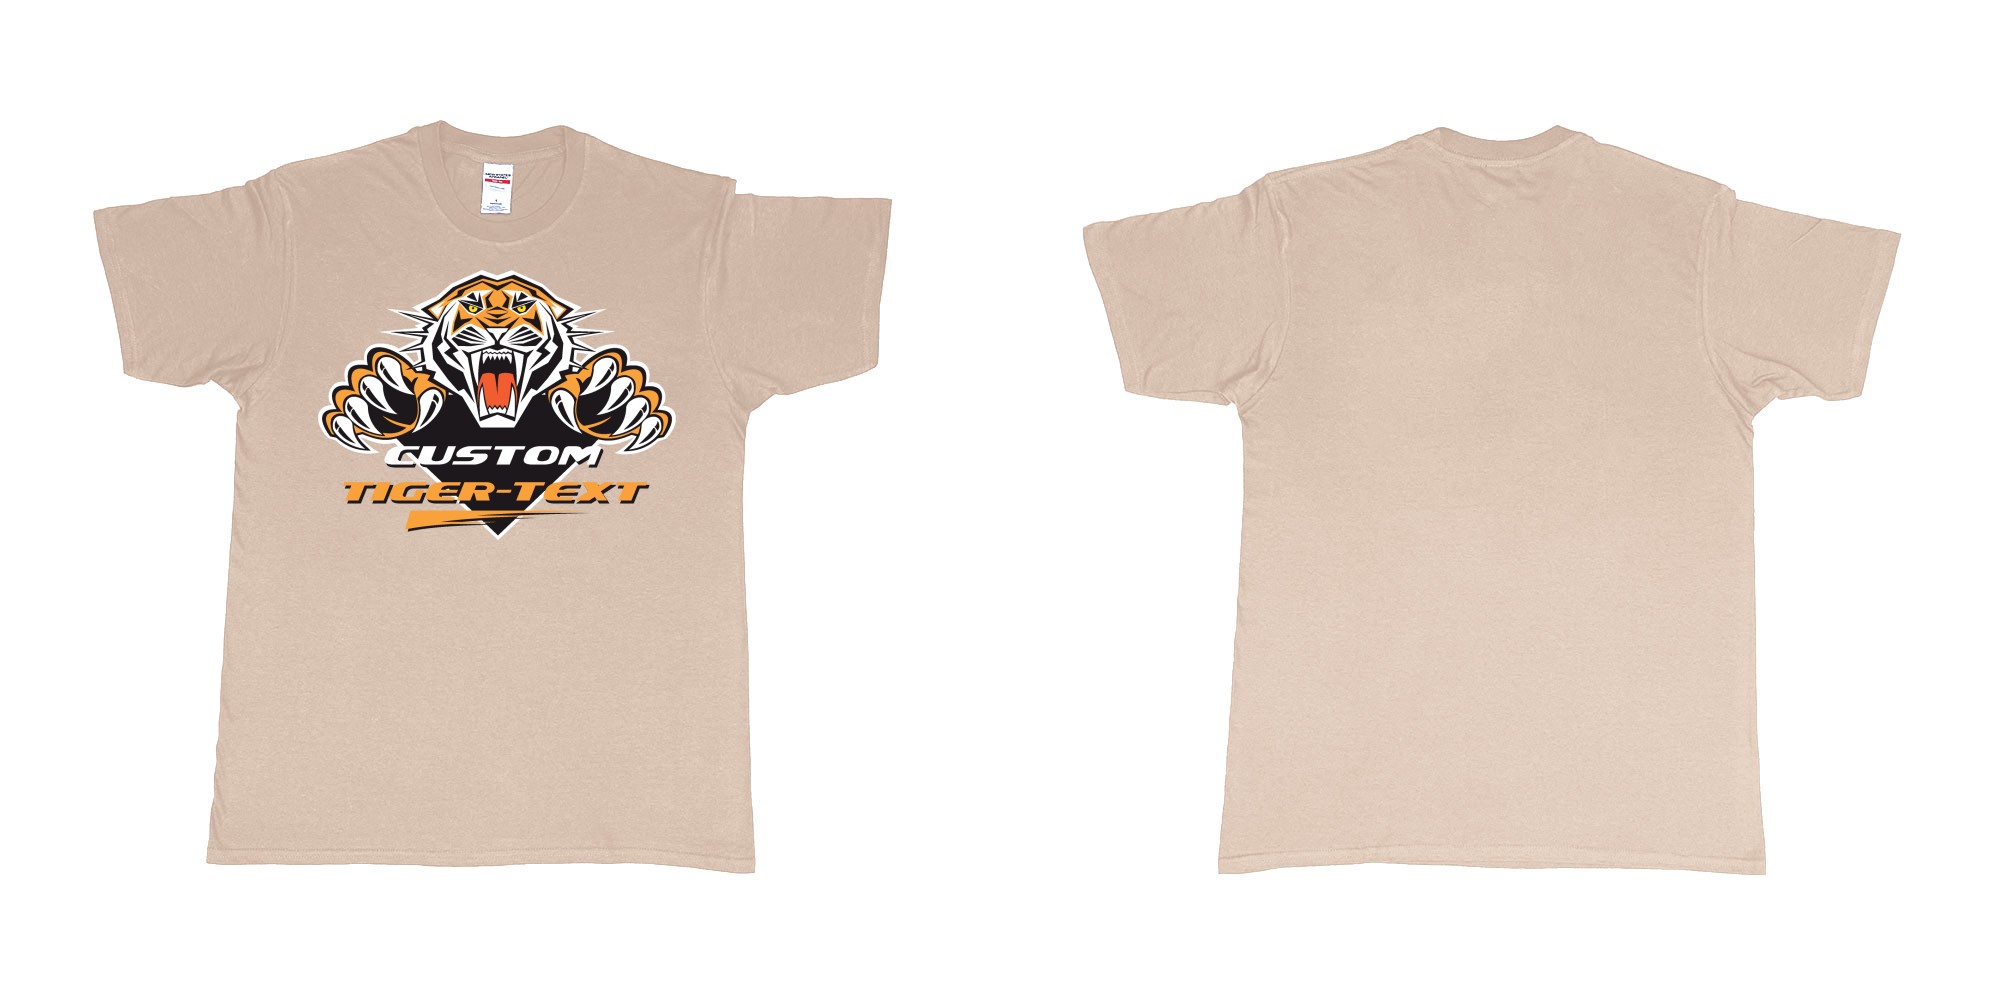 Custom tshirt design the wests tigers sydney national rugby league custom tshirt print in fabric color sand choice your own text made in Bali by The Pirate Way